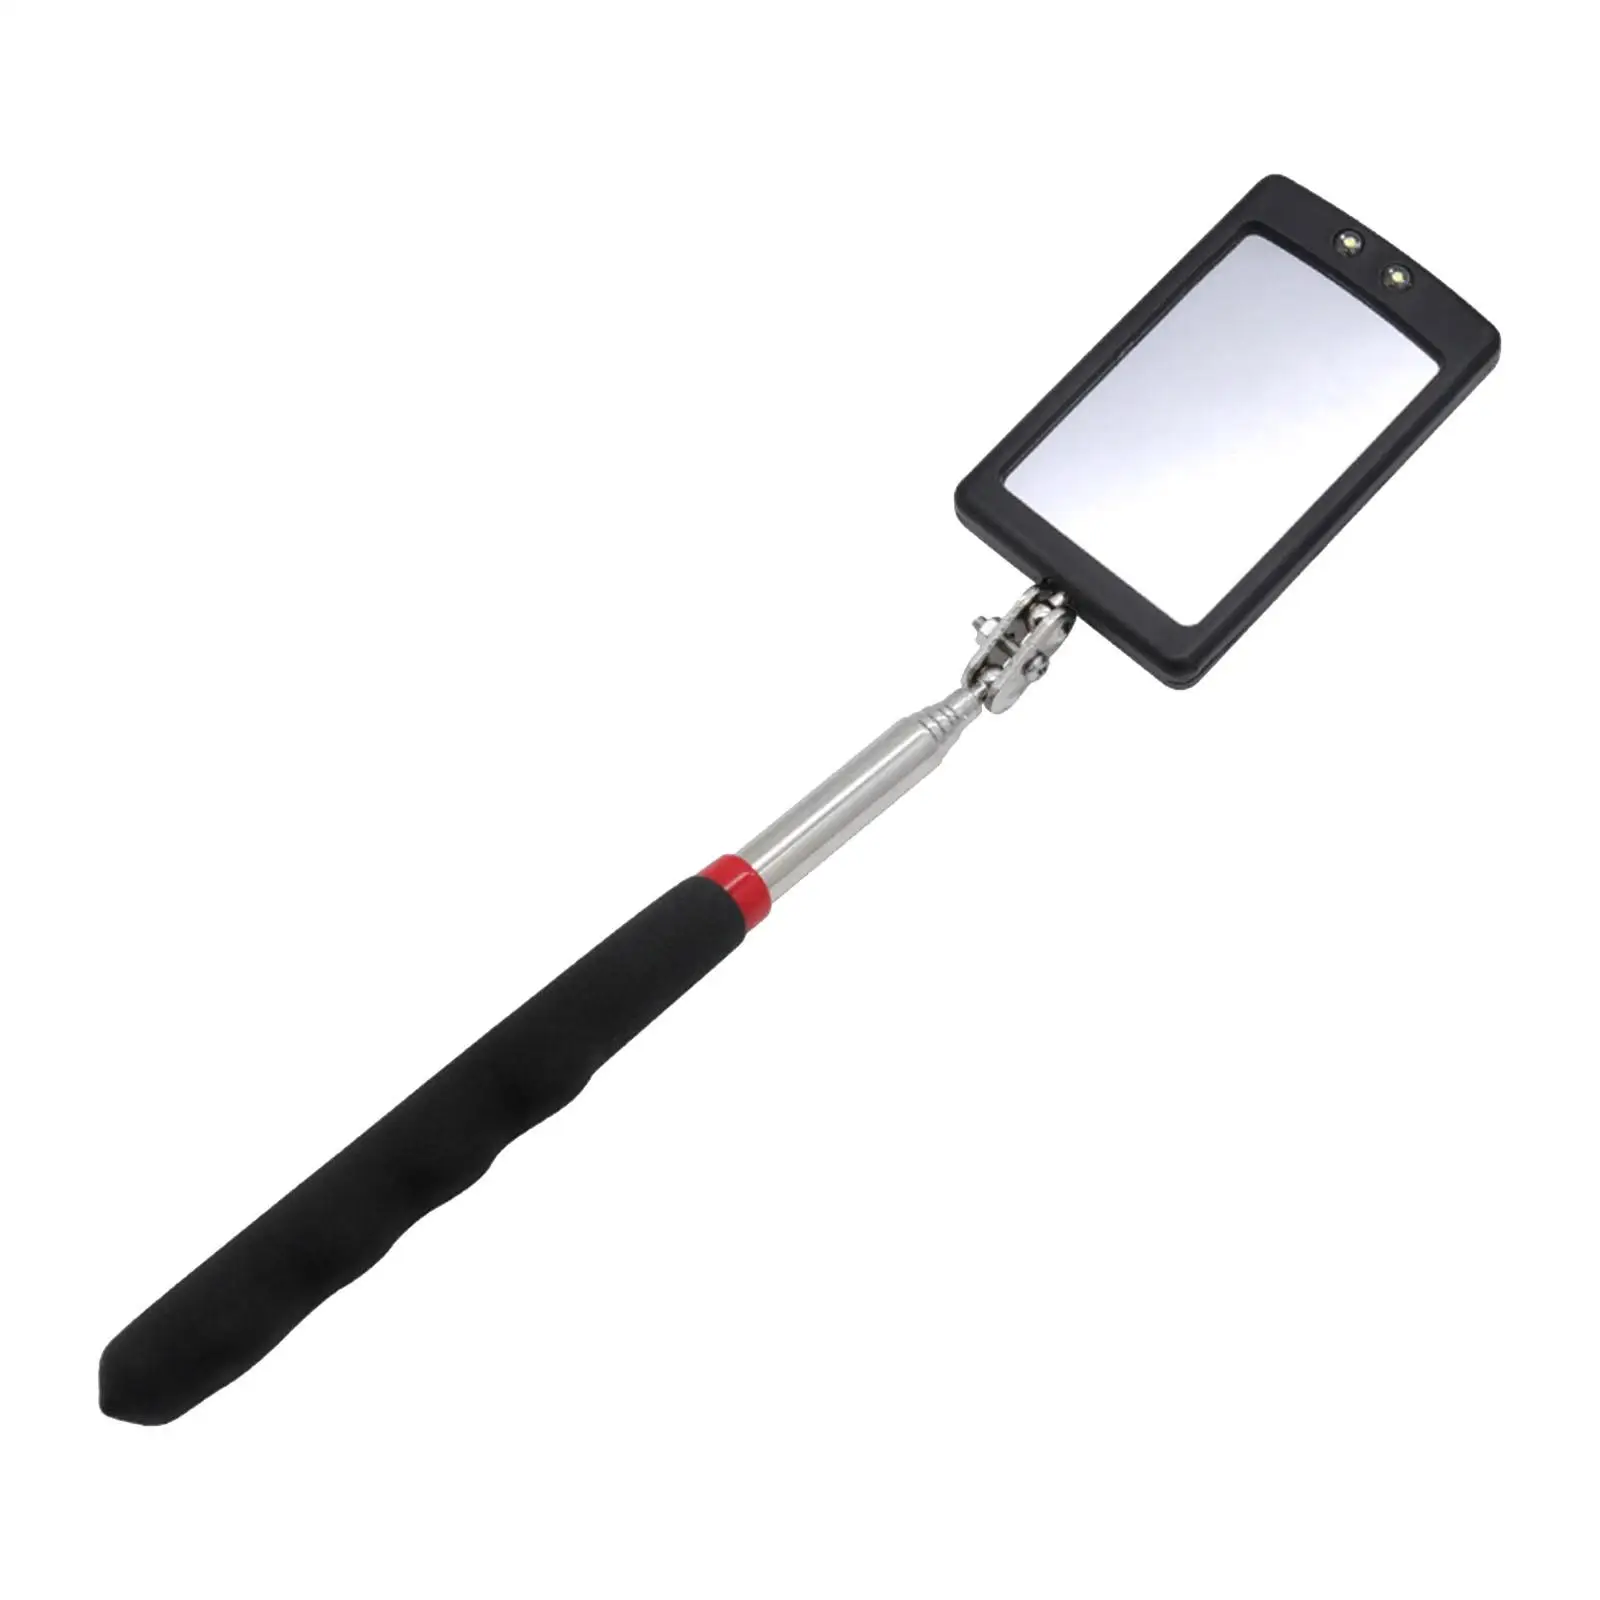 Telescopic Inspection Mirror Pick up Tool with LED for Home Inspector Small Parts Observation Eyelashes Car Repair